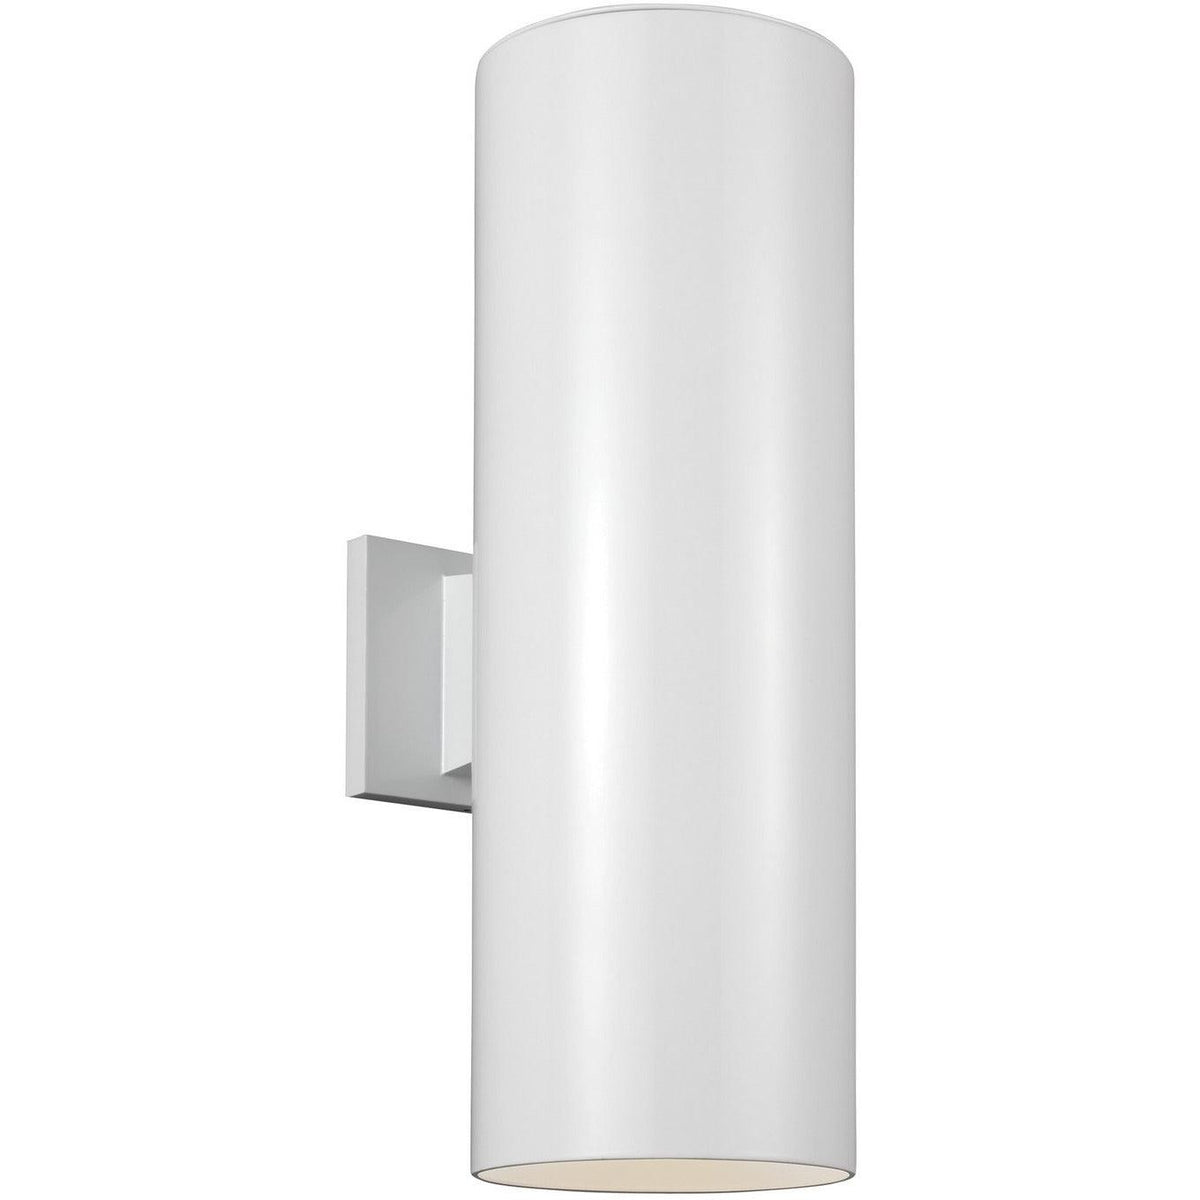 Generation Lighting - Outdoor Cylinders LED Outdoor Wall Sconce - 8413897S-15 | Montreal Lighting & Hardware